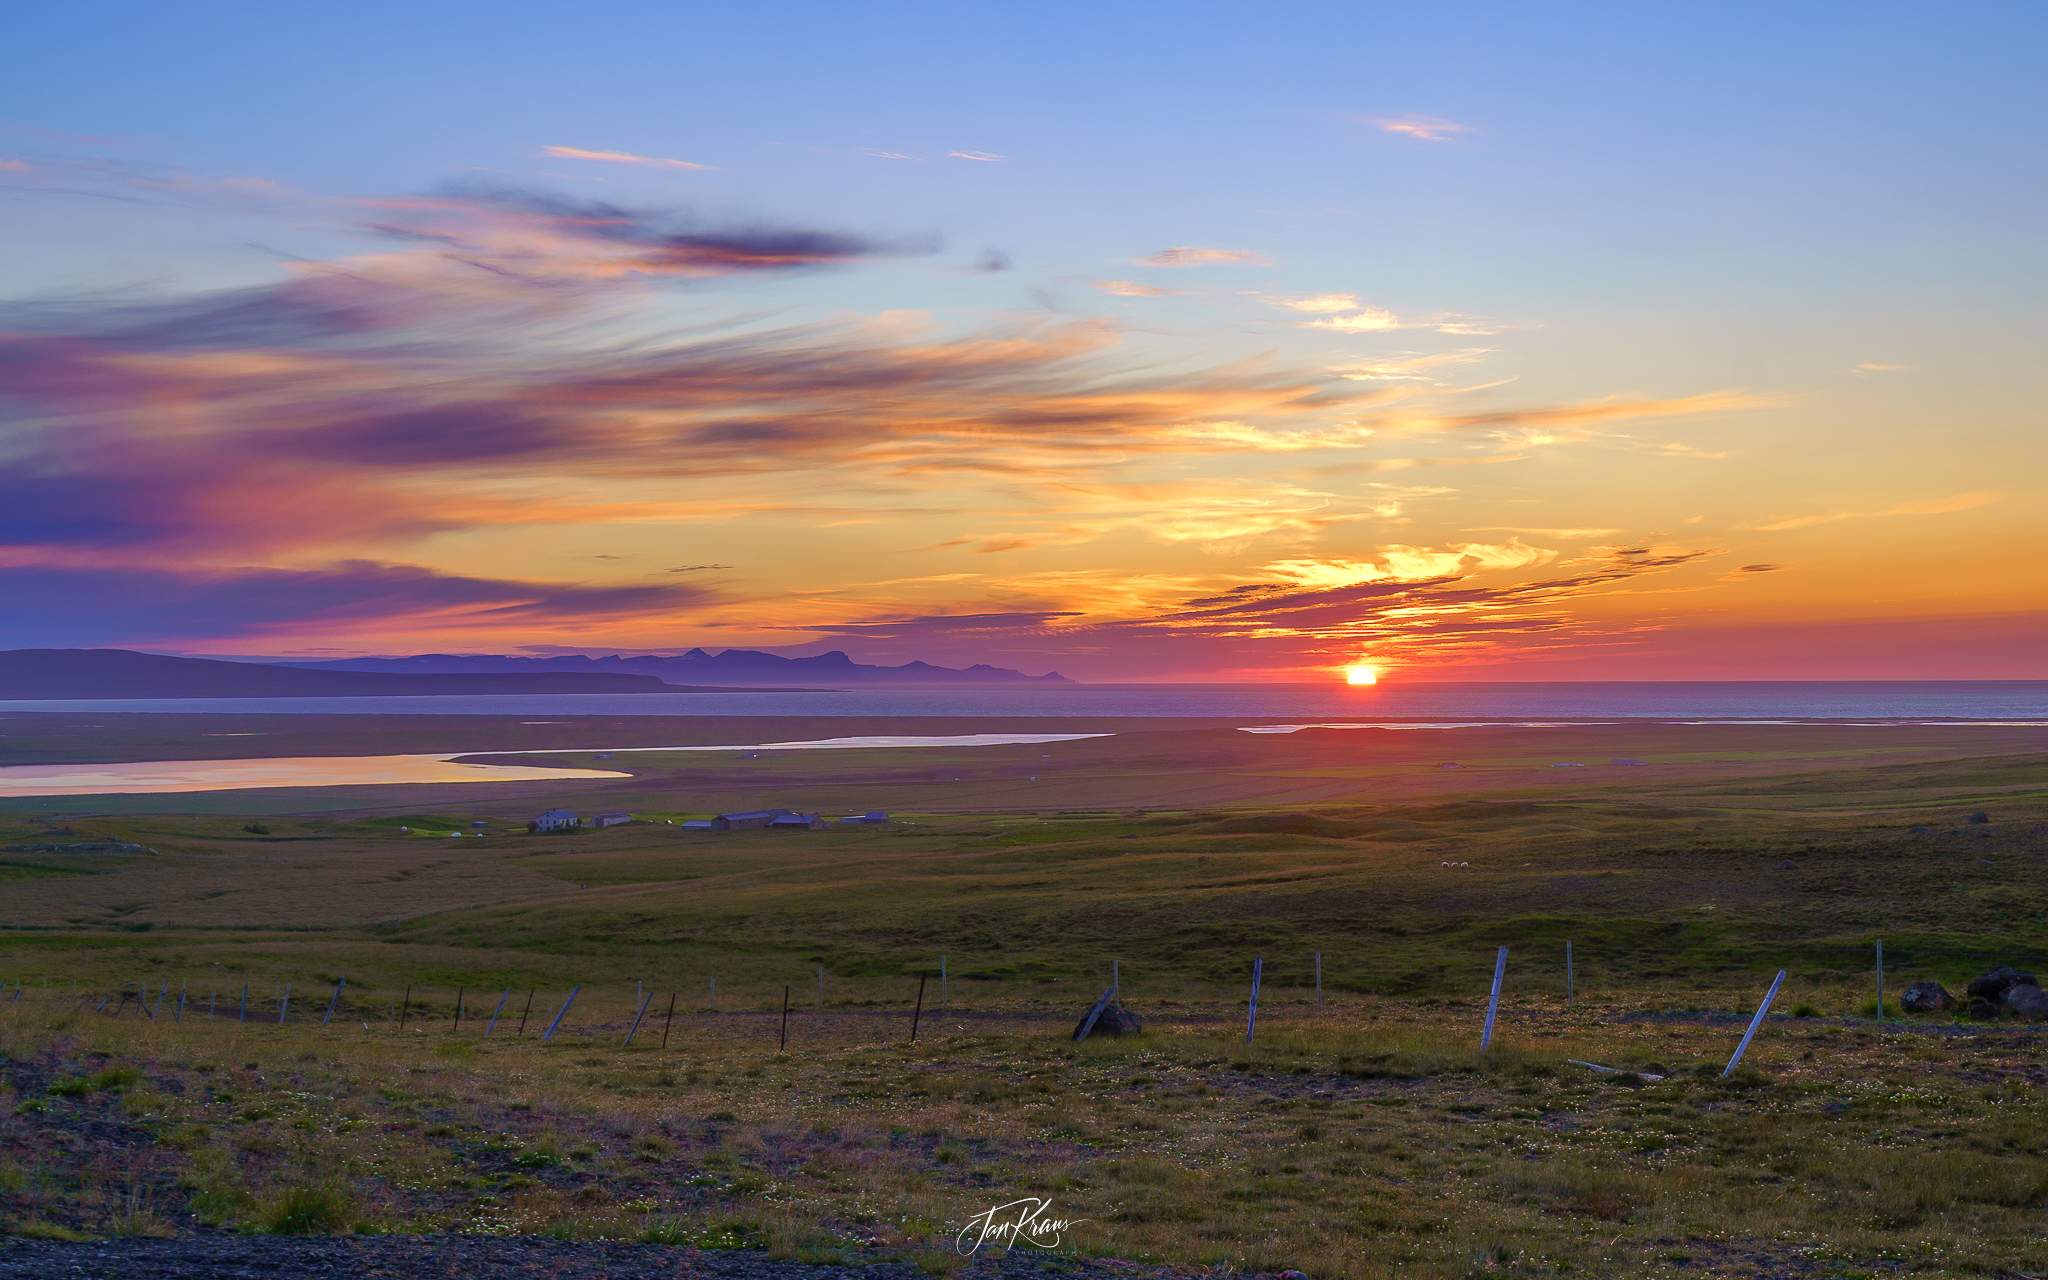 One more sunset, this time at the sea level, somewhere north, along Ring Road, Iceland